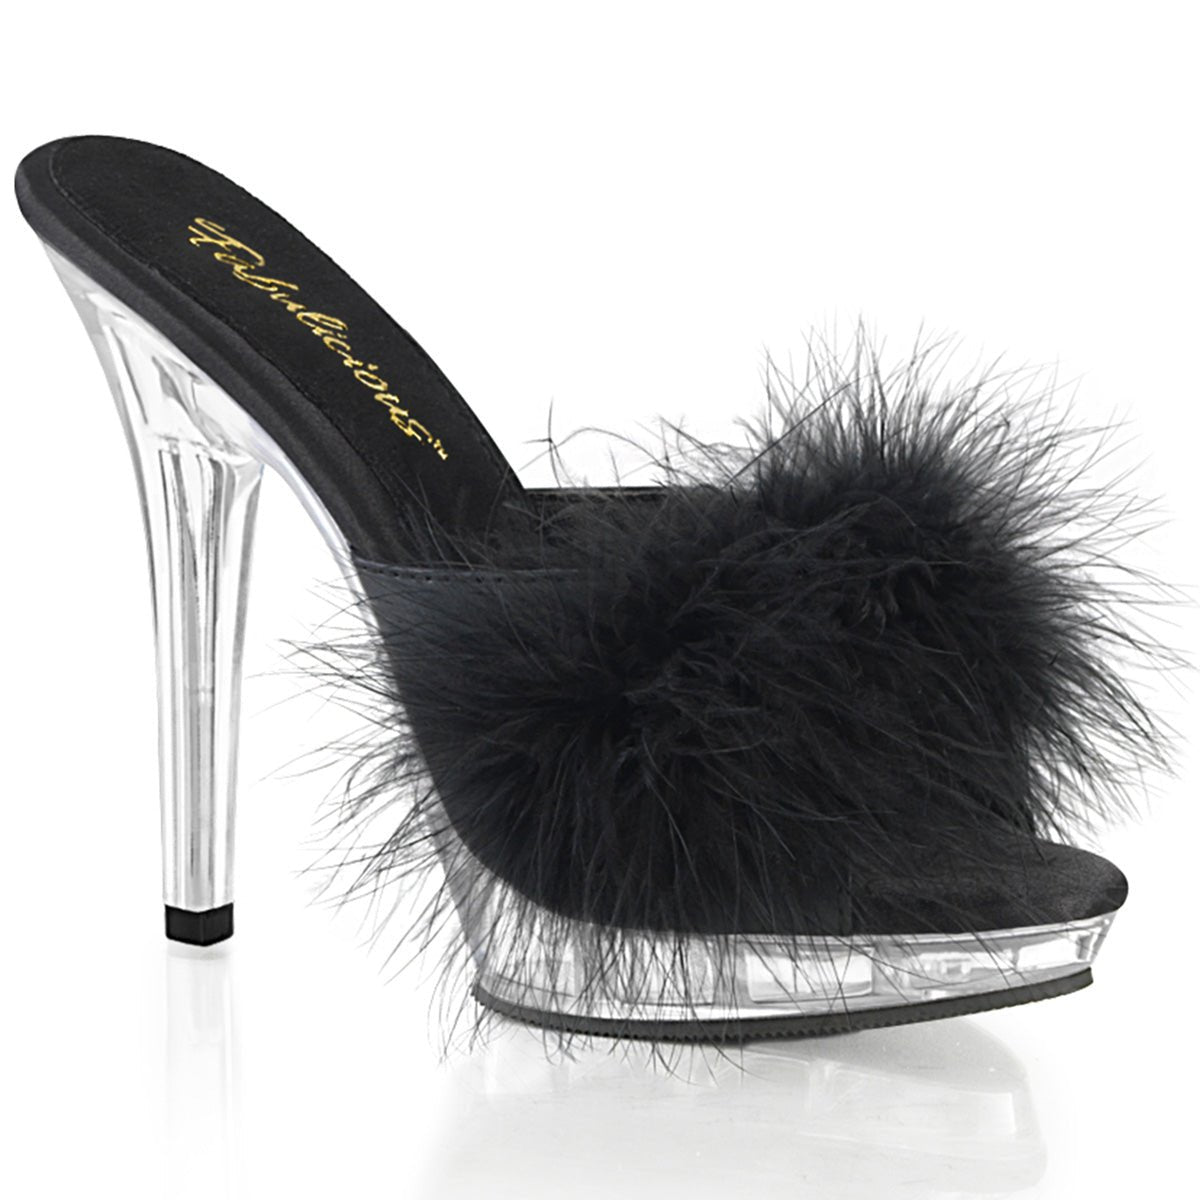 Clearance Fabulicious Lip 101-8 Black Size 4UK/7USA - From Clearance Sold By Alternative Footwear